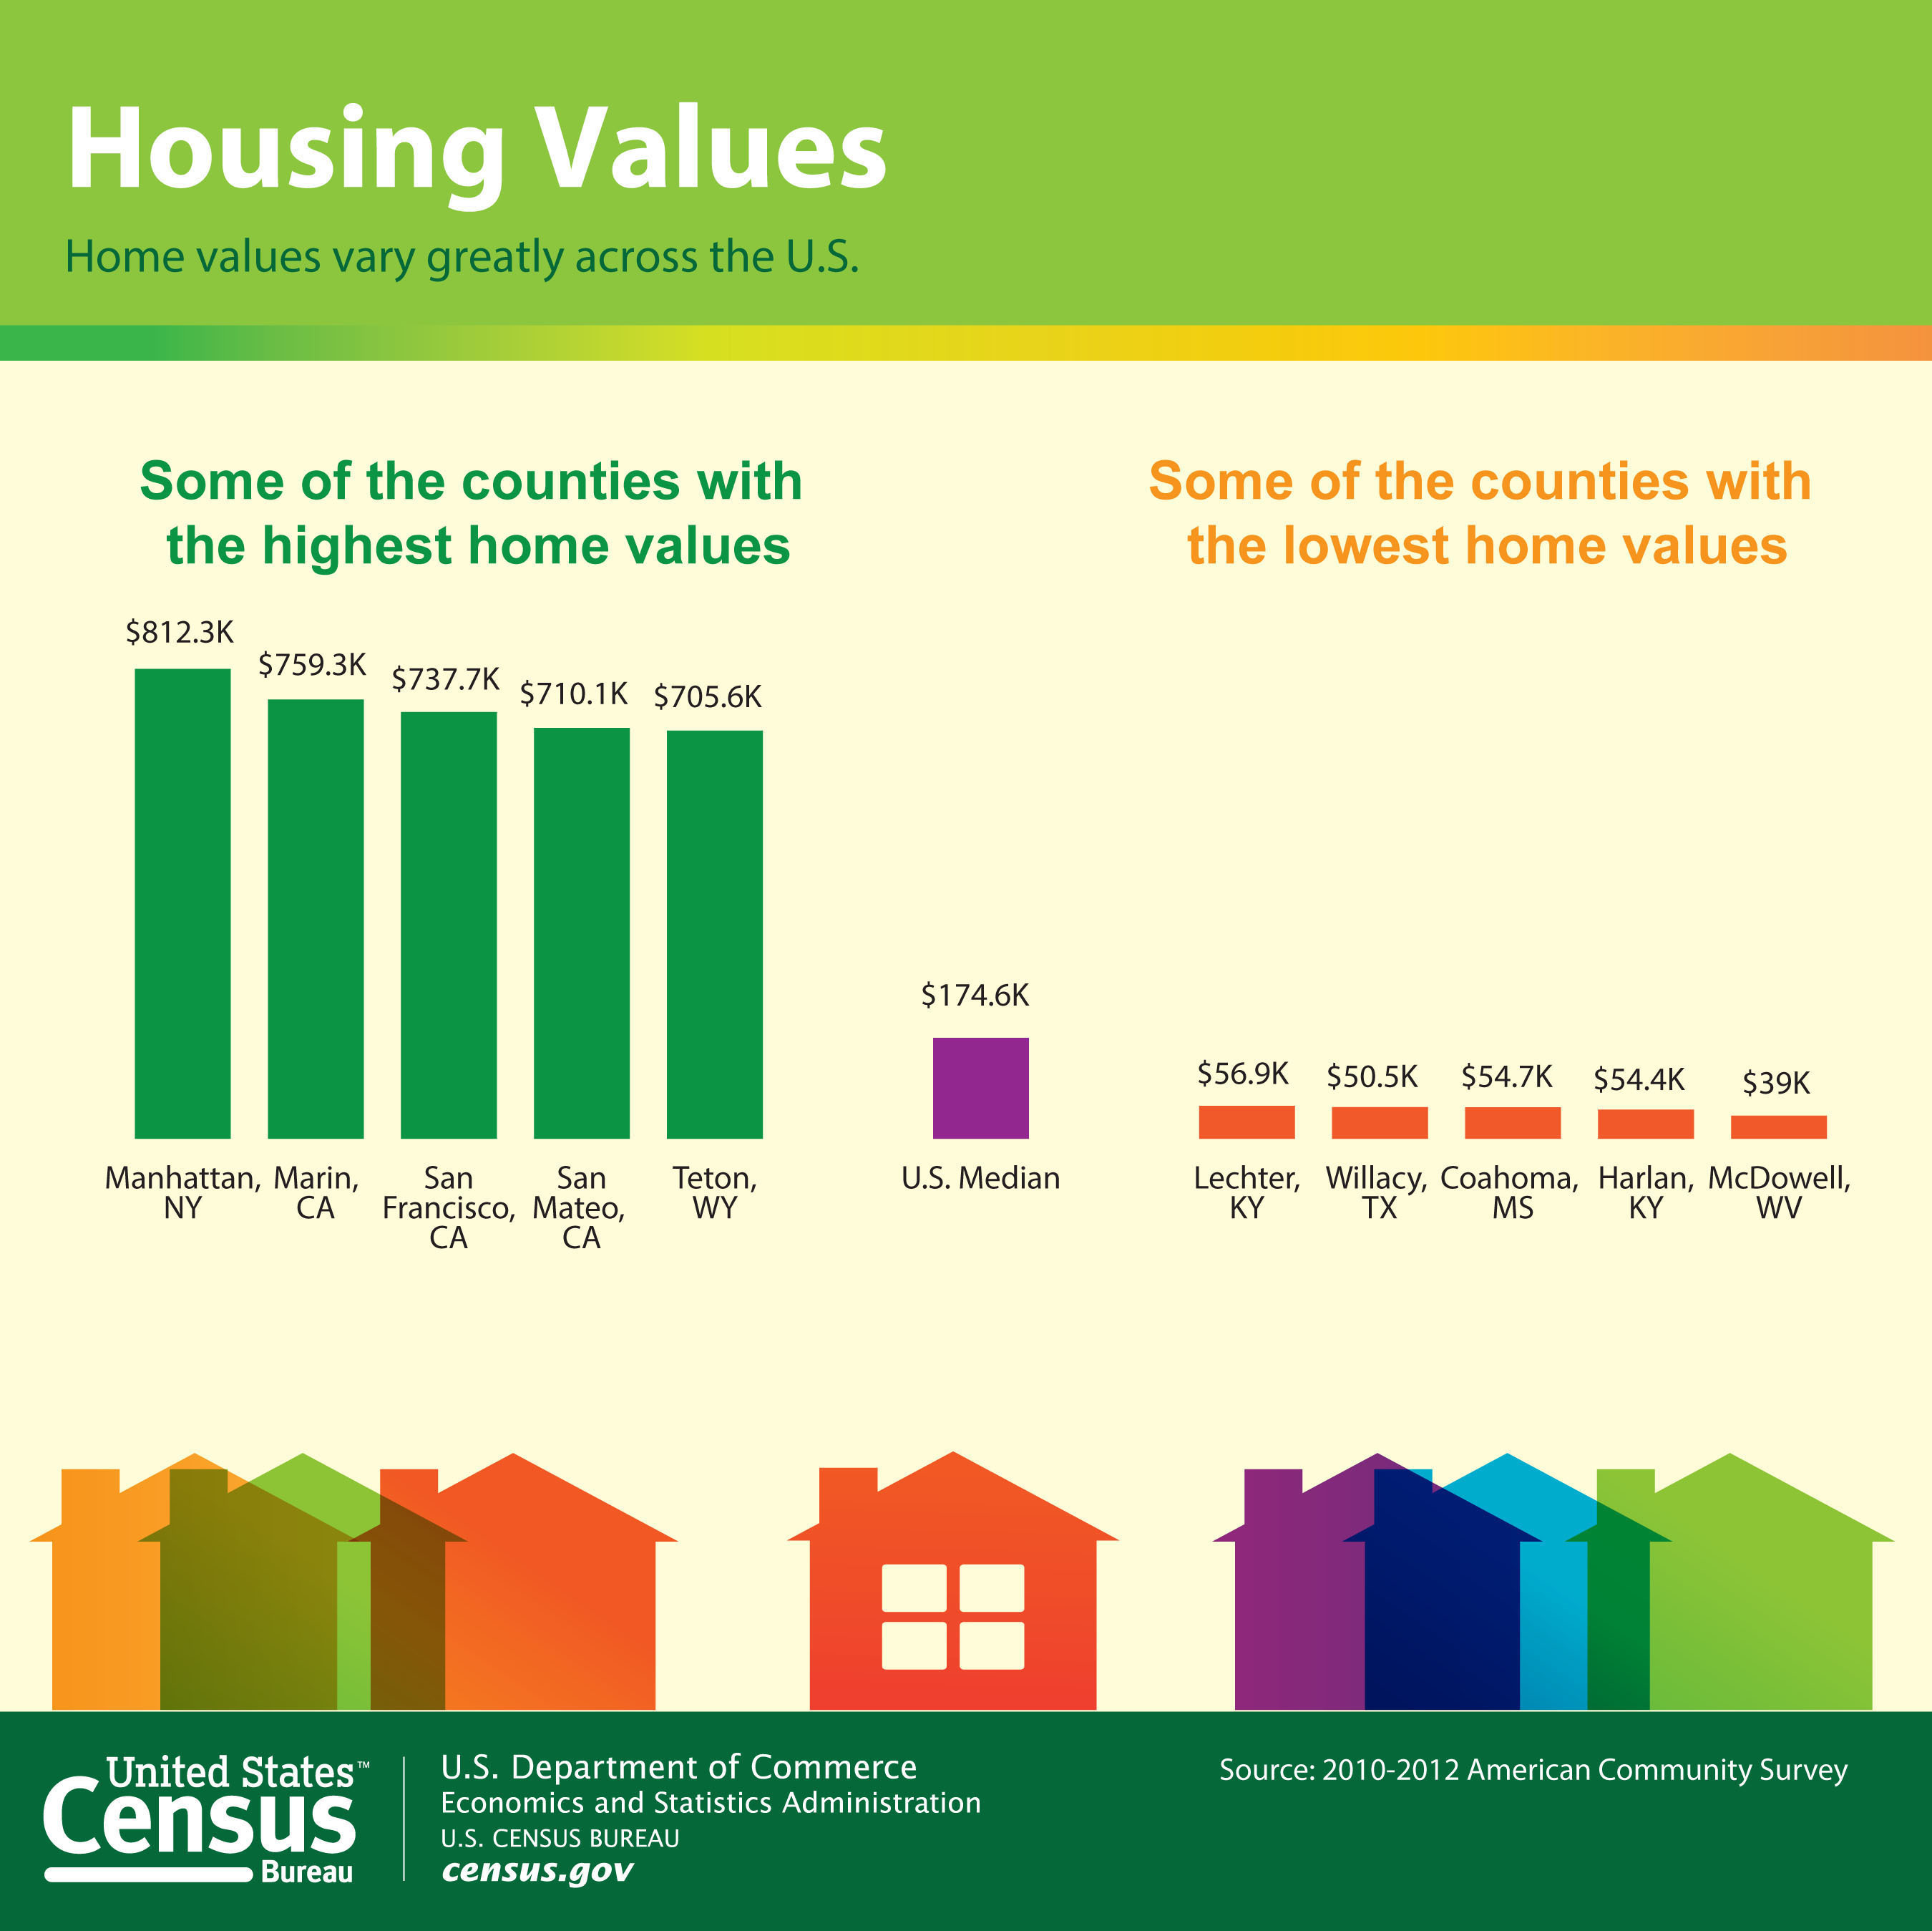 Statistics from the U.S. Census Bureau's American Community Survey show how median home values vary among counties around the nation. These findings come from the Census Bureau's brief, Home Value and Homeownership Rates: Recession and Post-Recession Comparisons From 2007-2009 to 2010-2012. Additionally, the brief found that median home values in many small counties across the nation held steady after the most recent recession, while values in large counties declined. More information:http://www.census.gov/newsroom/releases/archives/american_community_survey_acs/cb13-190.html. (PRNewsFoto/U.S. Census Bureau) (PRNewsFoto/U.S. CENSUS BUREAU)